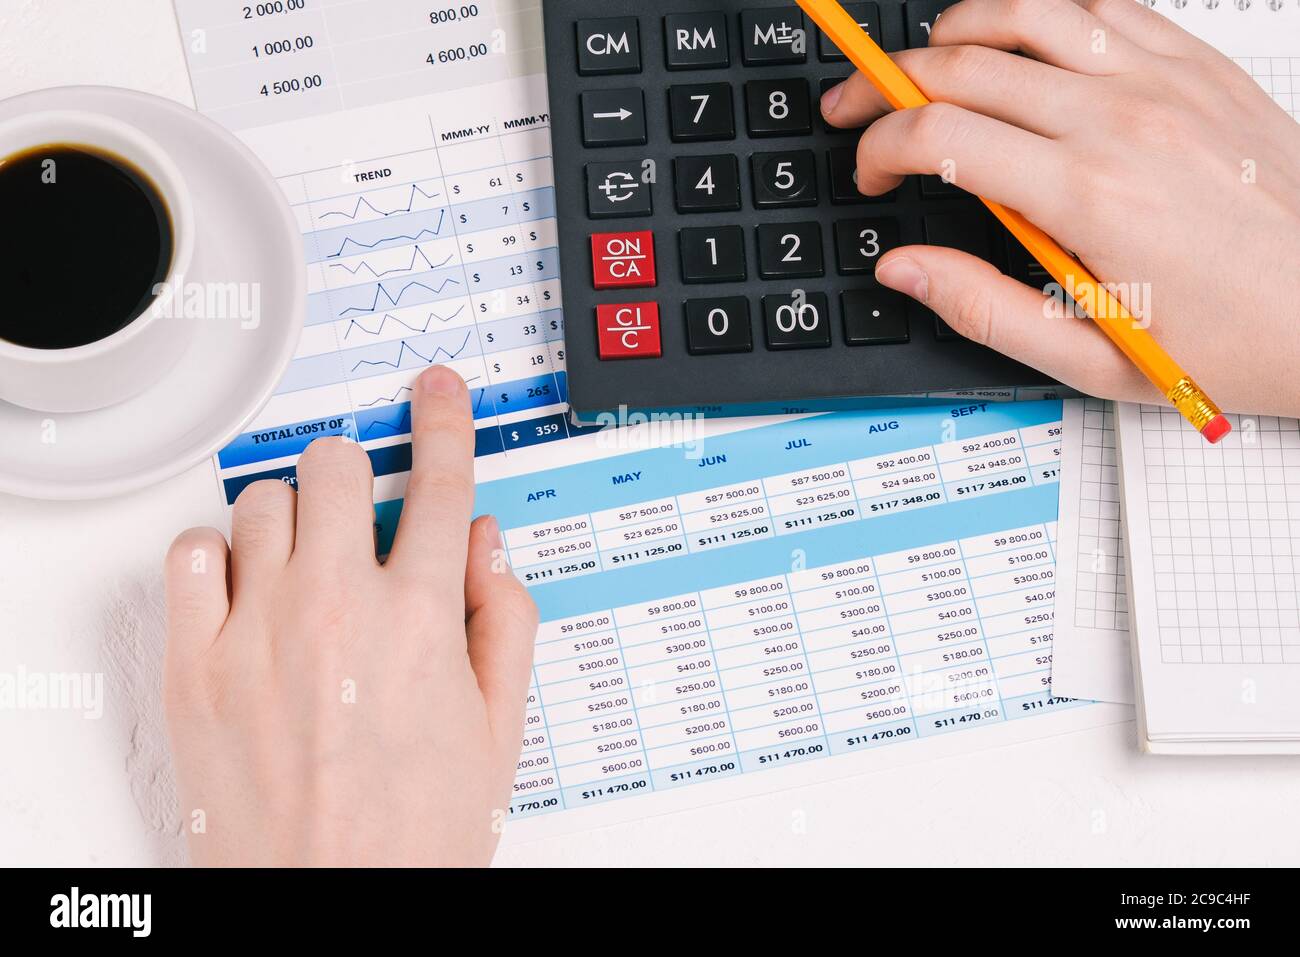 Businessman works with documents. Financial documents with charts, figures, and money. Calculator and hands. Marketing research, financial analysis of Stock Photo